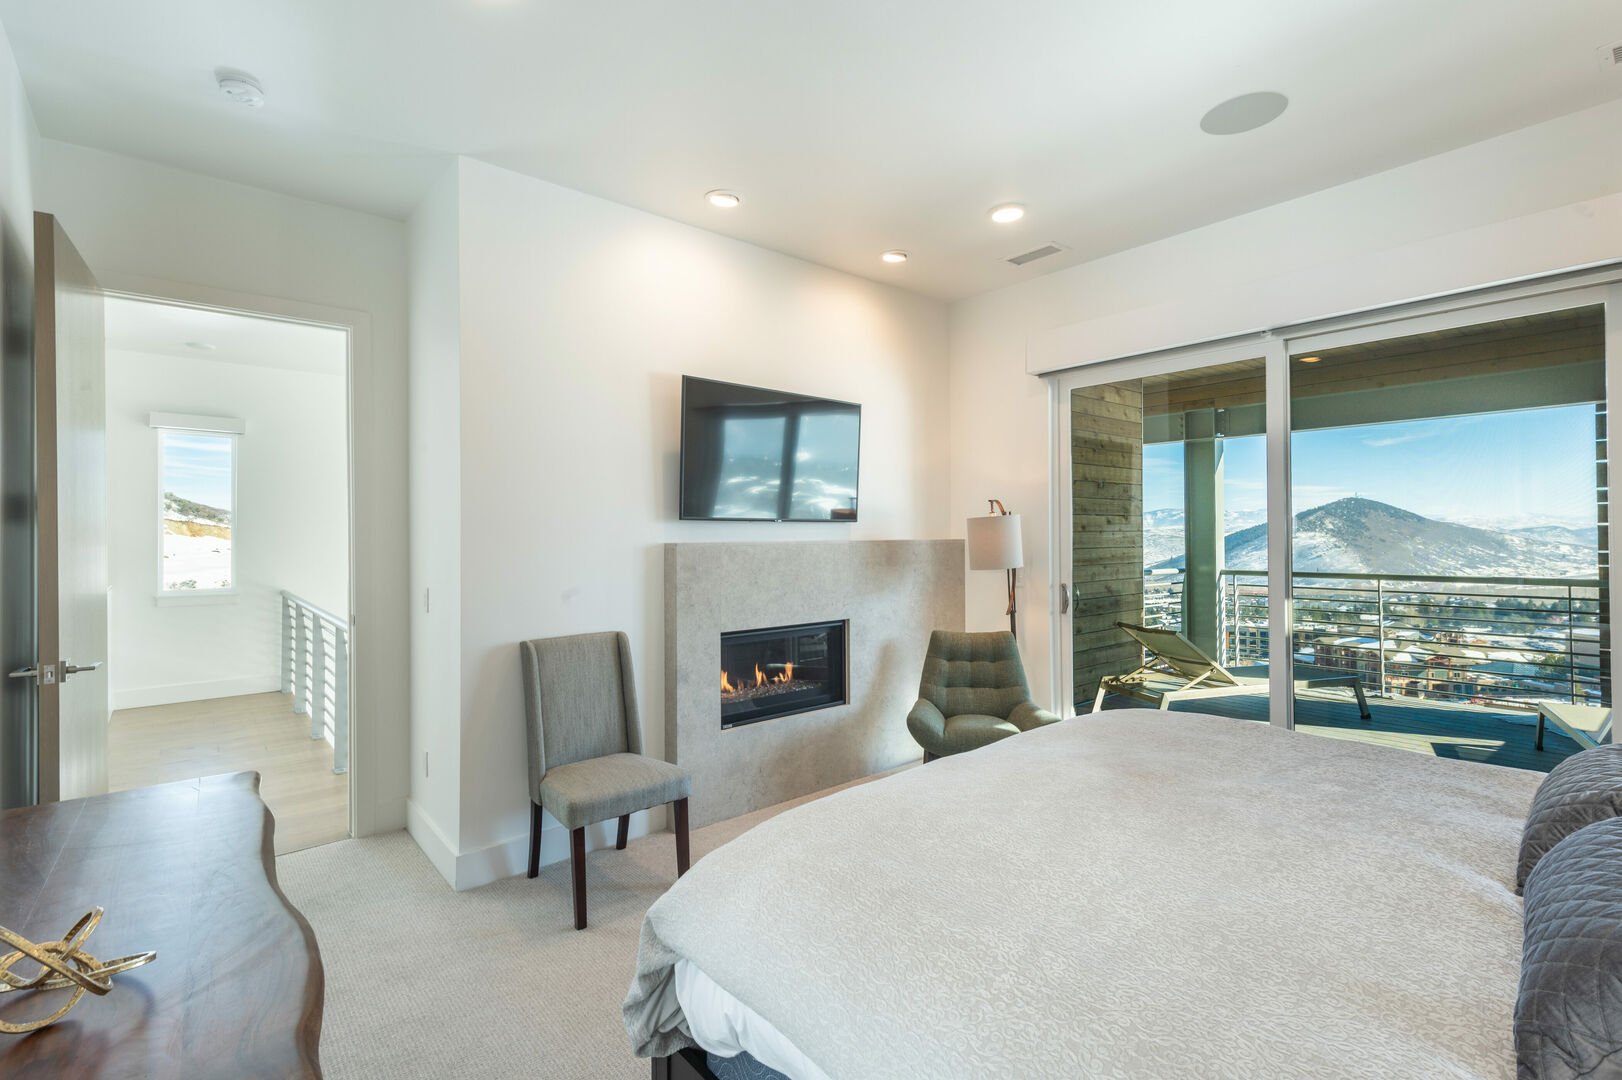 Master bedroom with mountain view and private balcony.